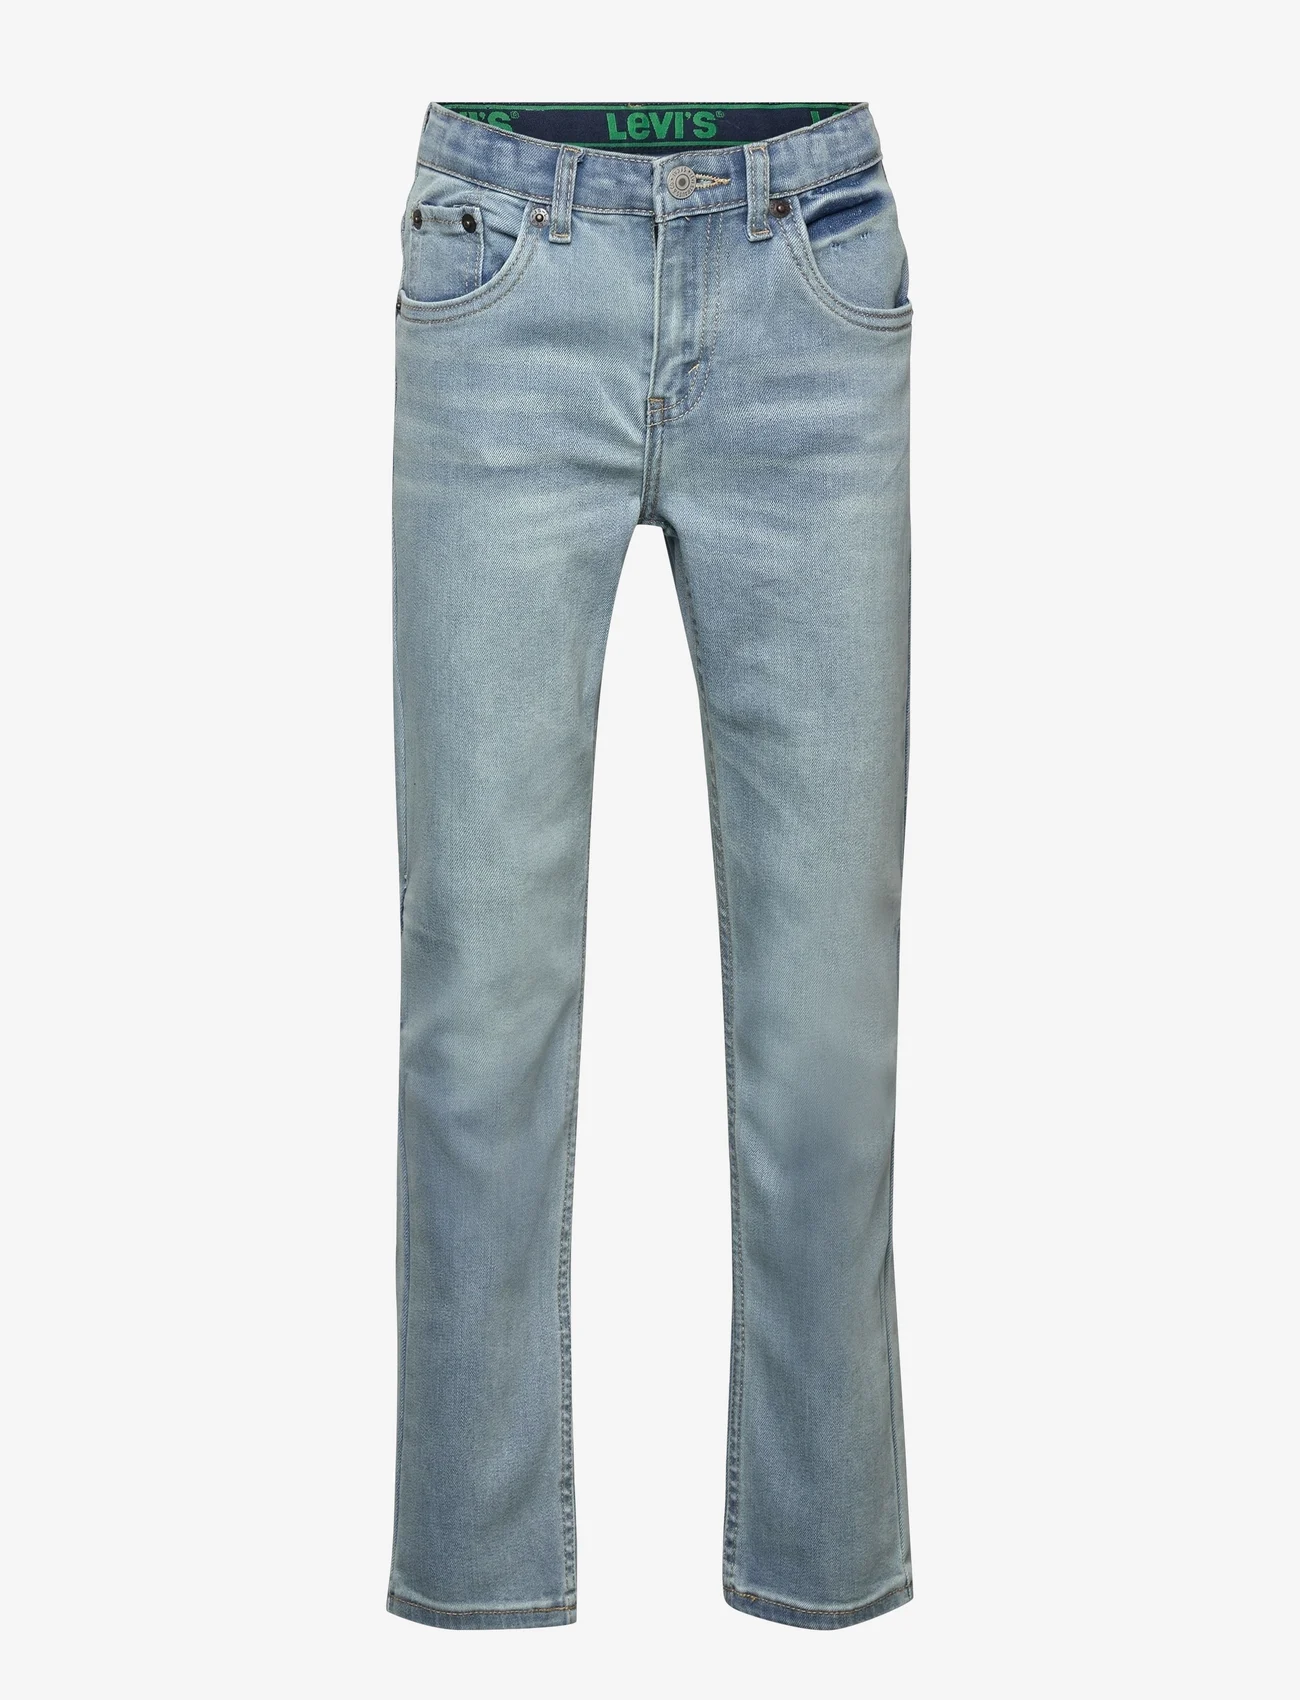 Levi's Levi's 511® Slim Fit Eco Performance Jeans (Blue), (,30 kr) |  Large selection of outlet-styles 